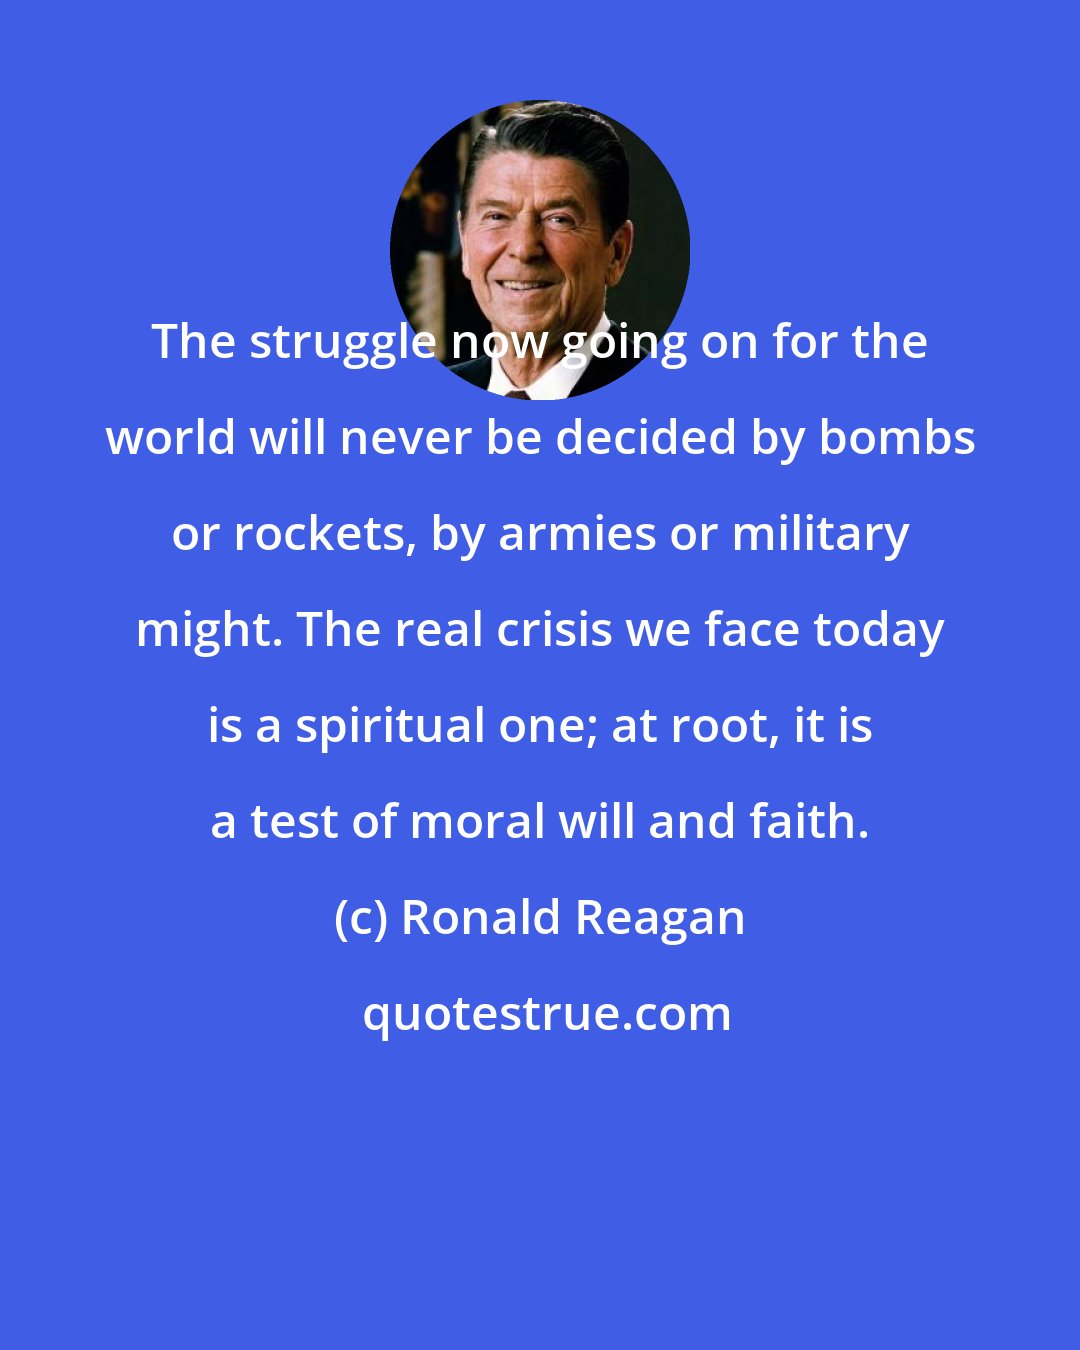 Ronald Reagan: The struggle now going on for the world will never be decided by bombs or rockets, by armies or military might. The real crisis we face today is a spiritual one; at root, it is a test of moral will and faith.